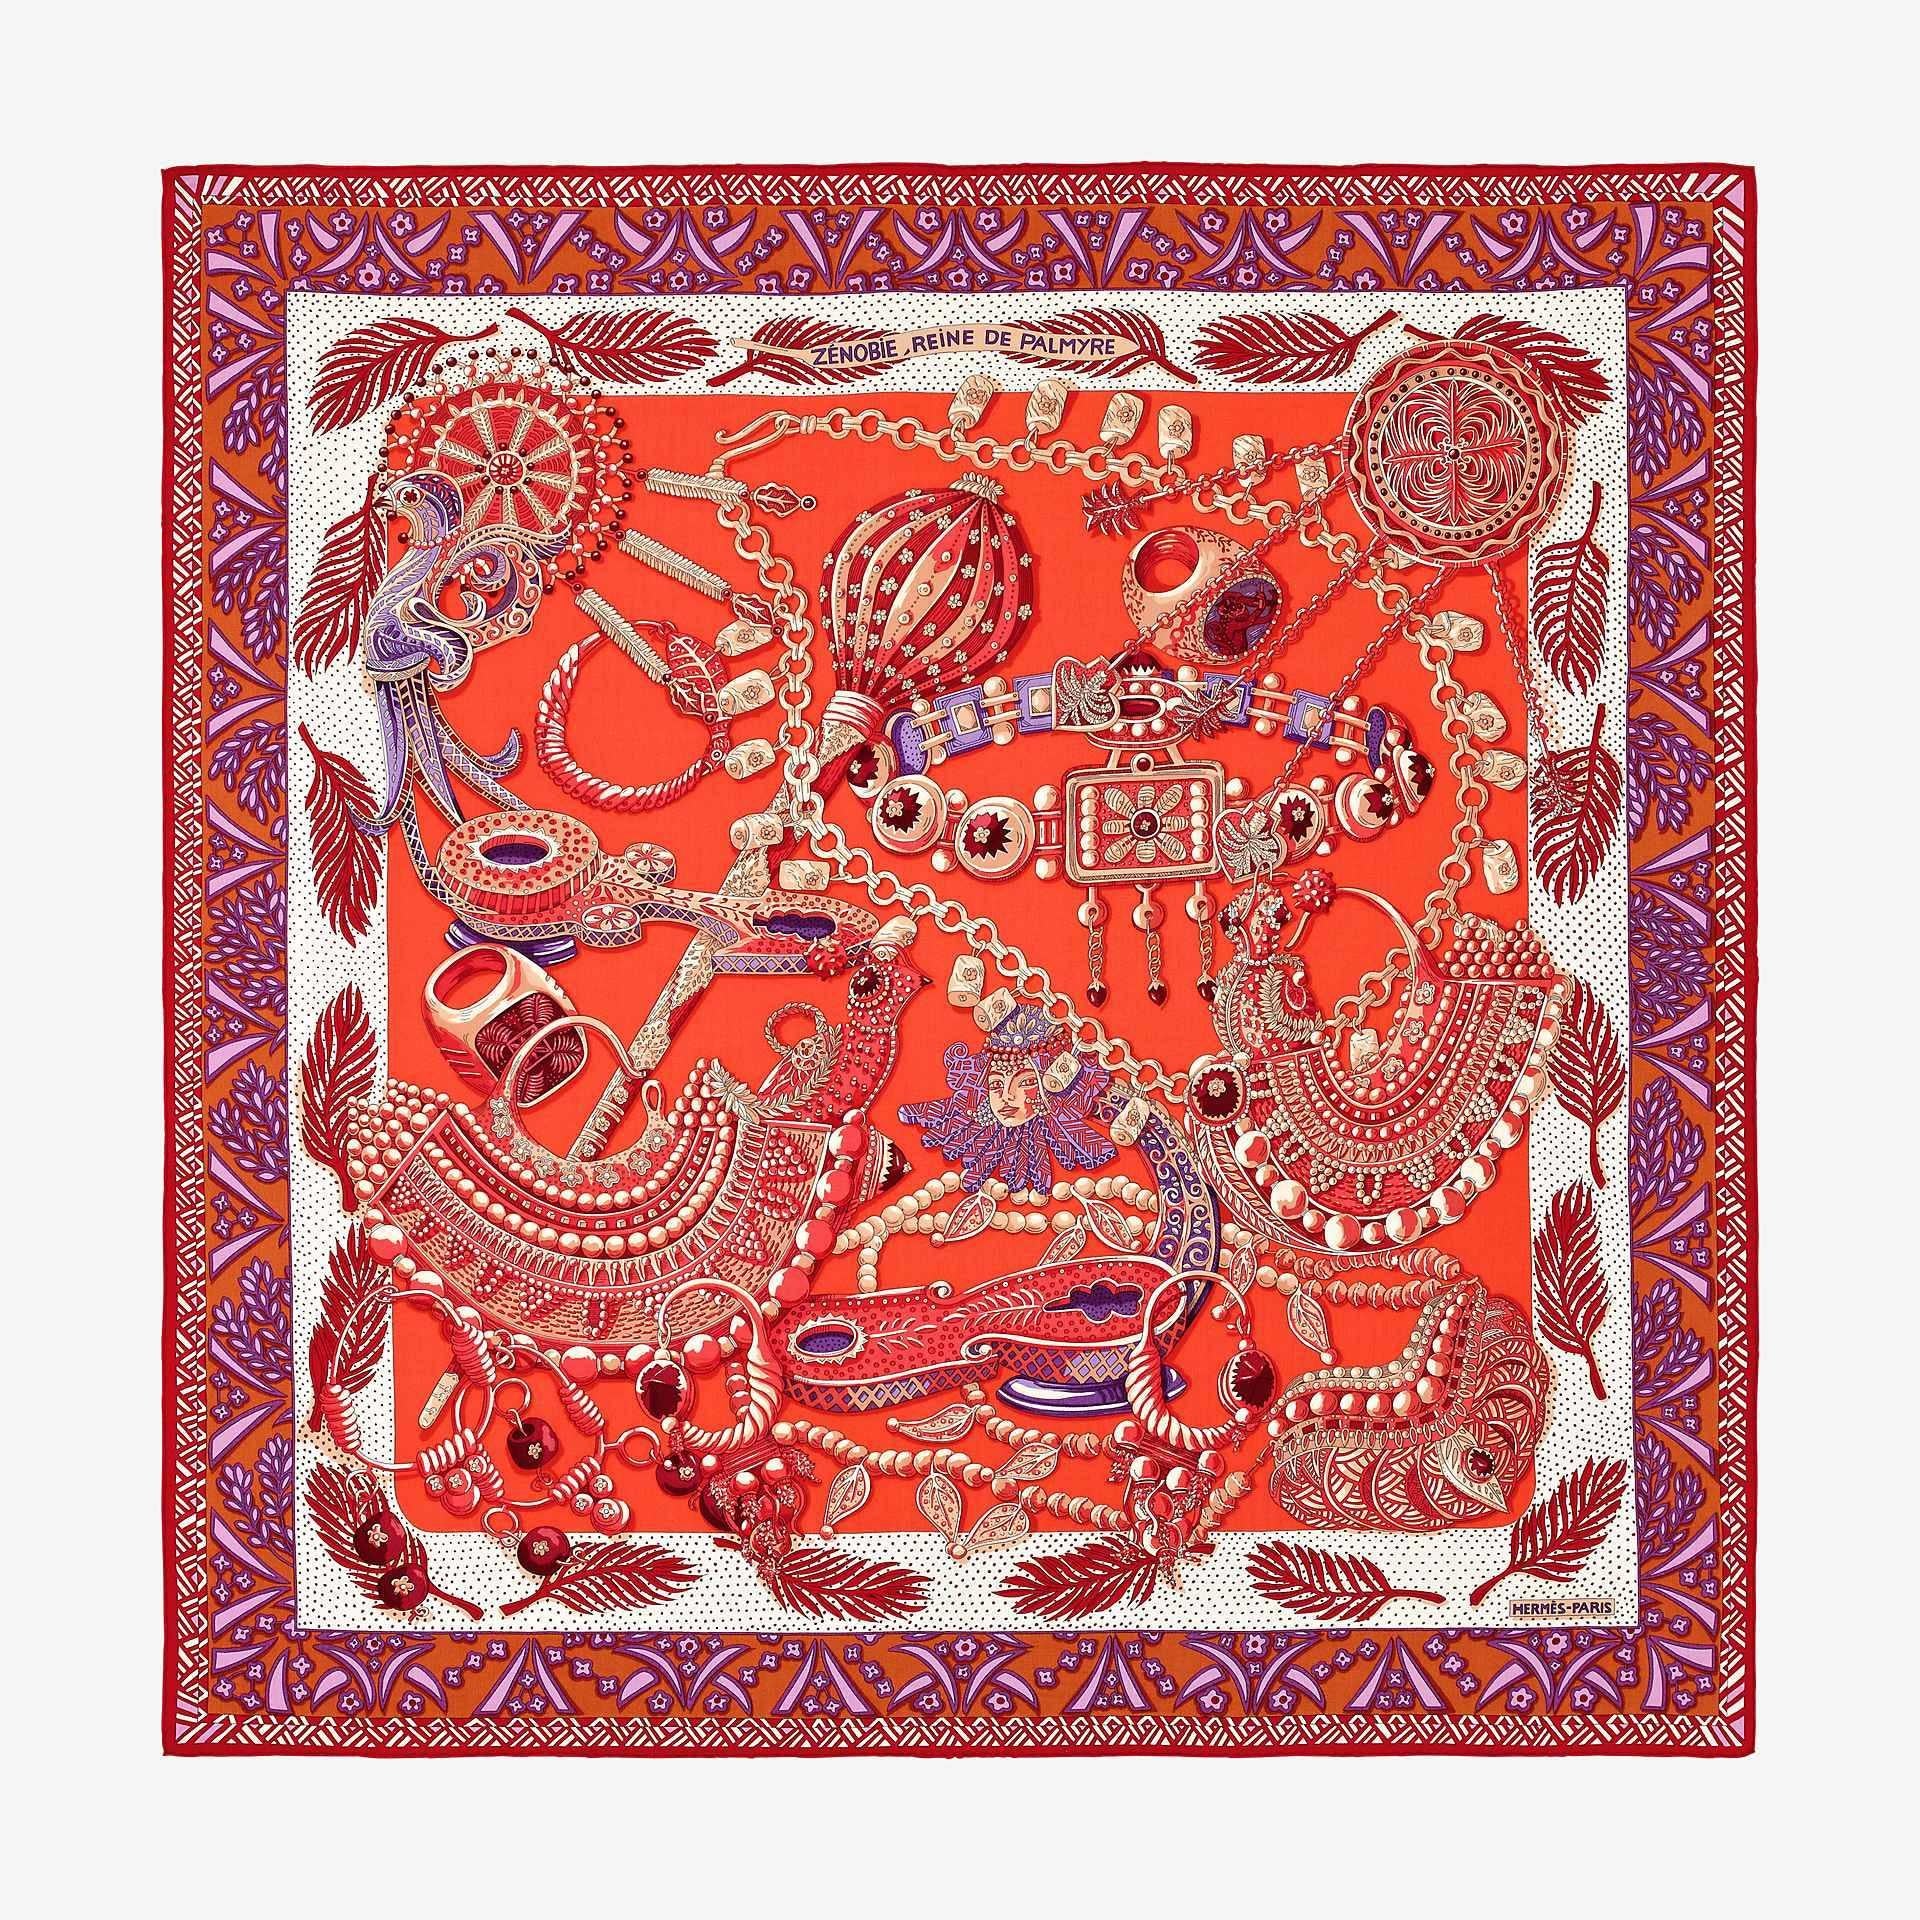 Designed By Annie Faivre
Zenobie Reine de Palmyre
Actual Collection
Size 140 cm x 140 cm 
Copyright and Signature 
Color : multicolor - Red / orange / violet
Sorry no Box 
Customs fees and vat are included.
Thank you for visiting my shop !